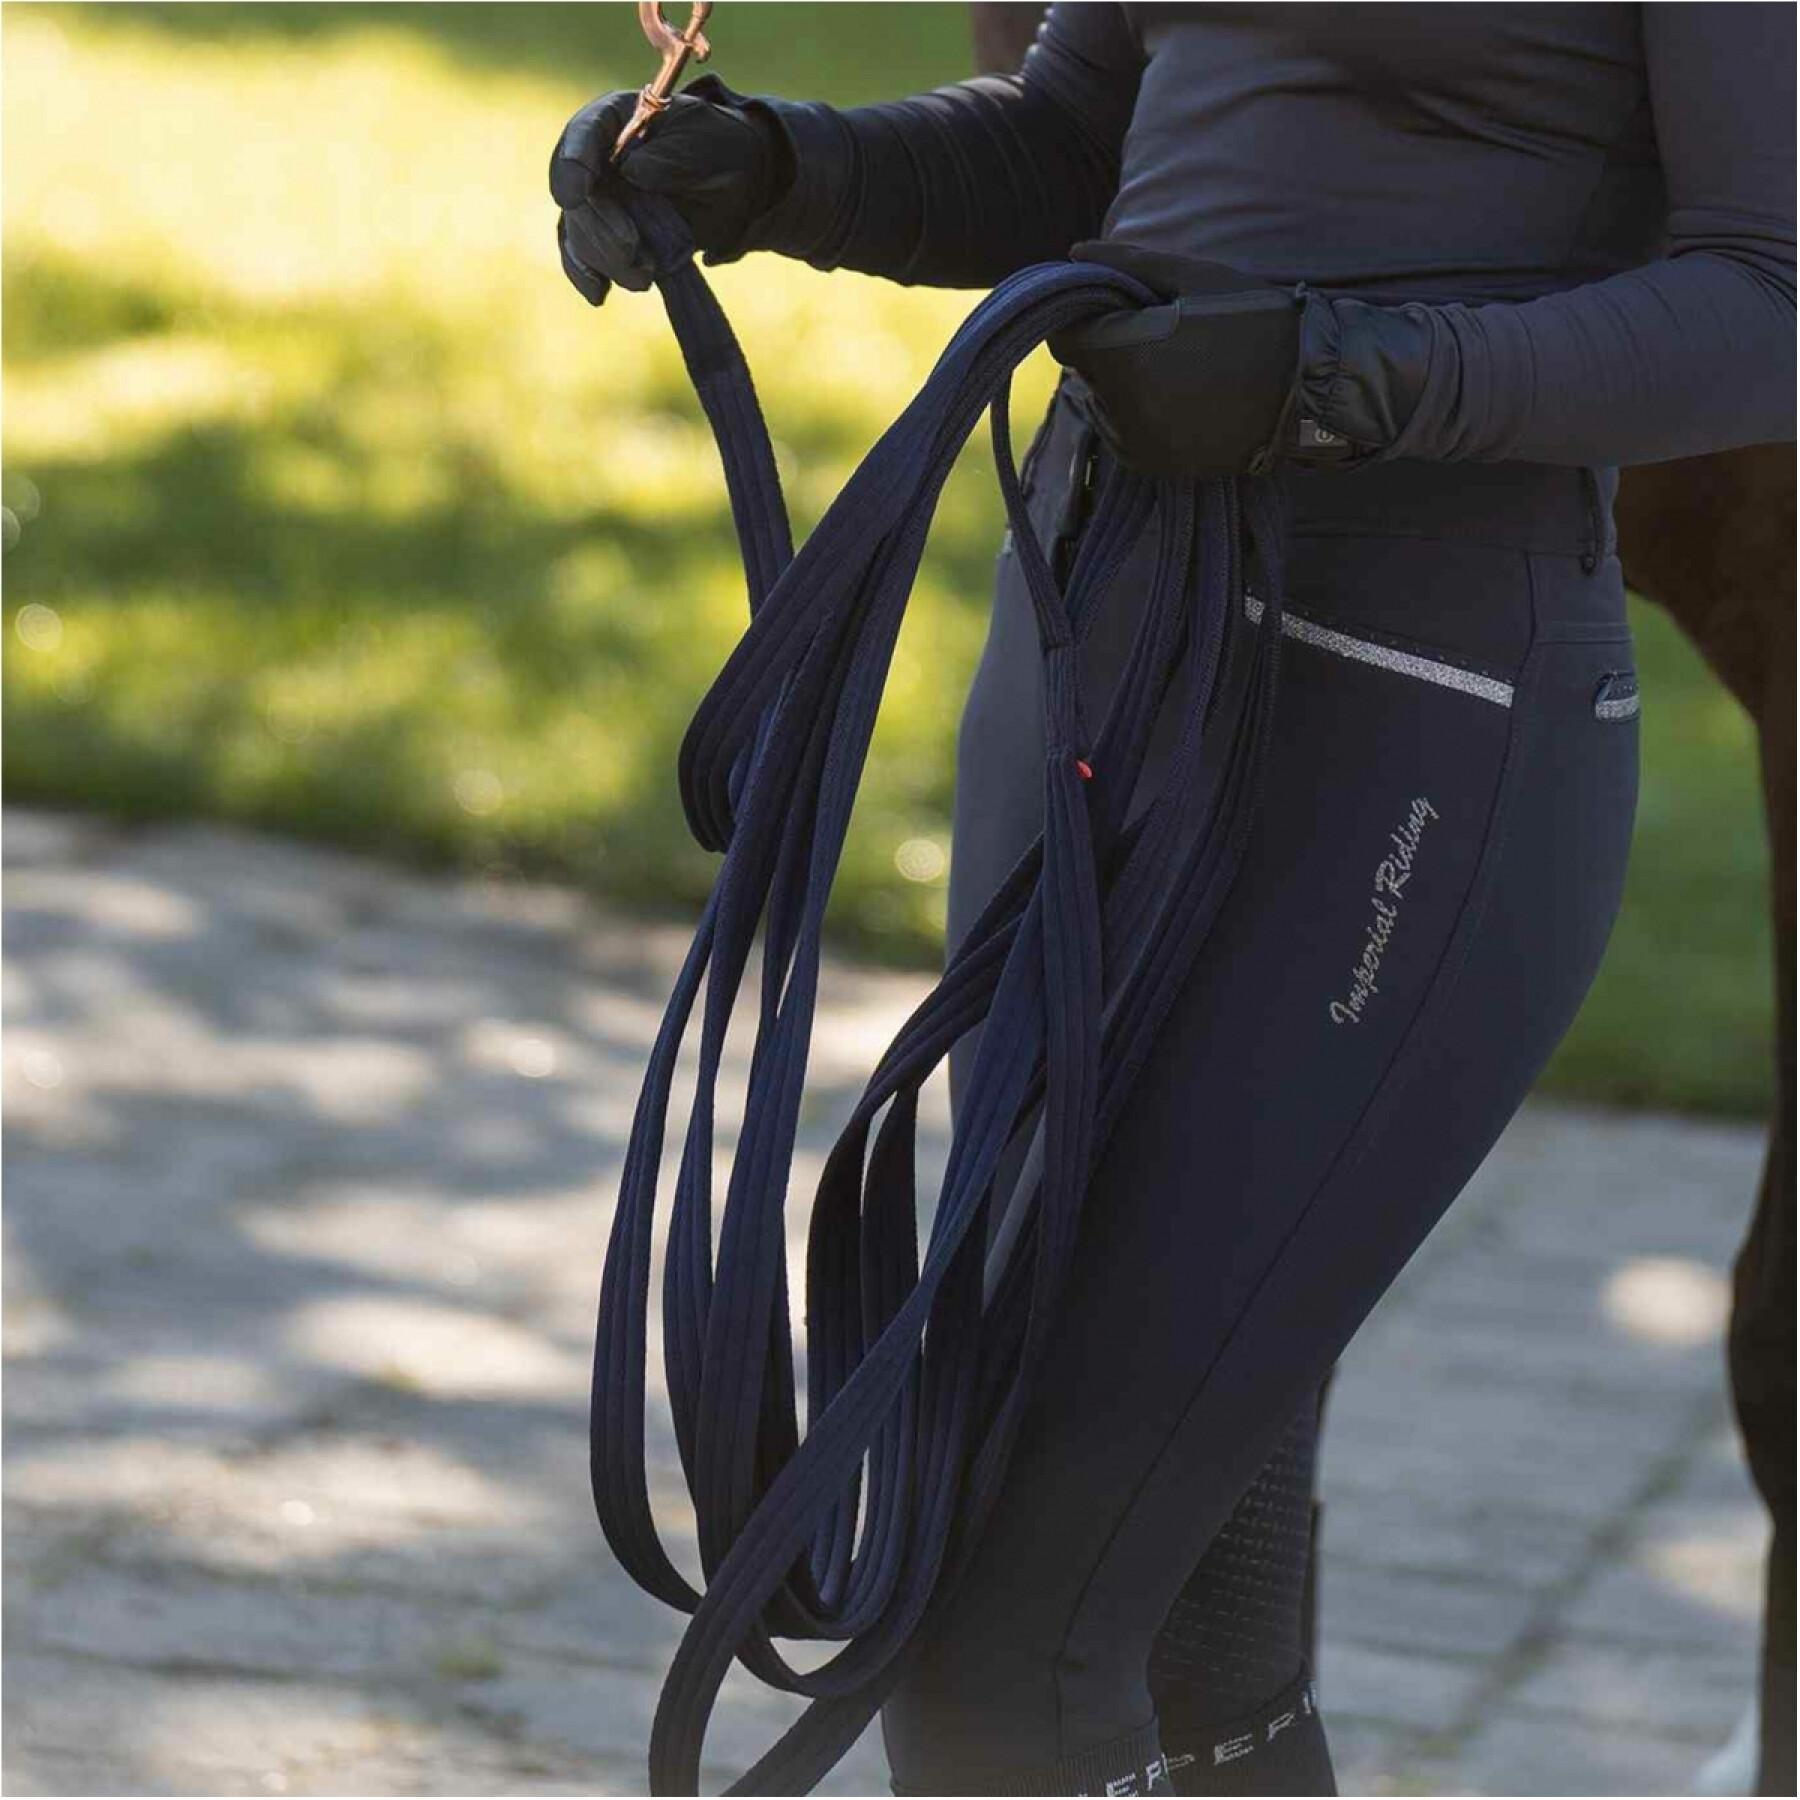 Longe weich gepolstert Imperial Riding Extra